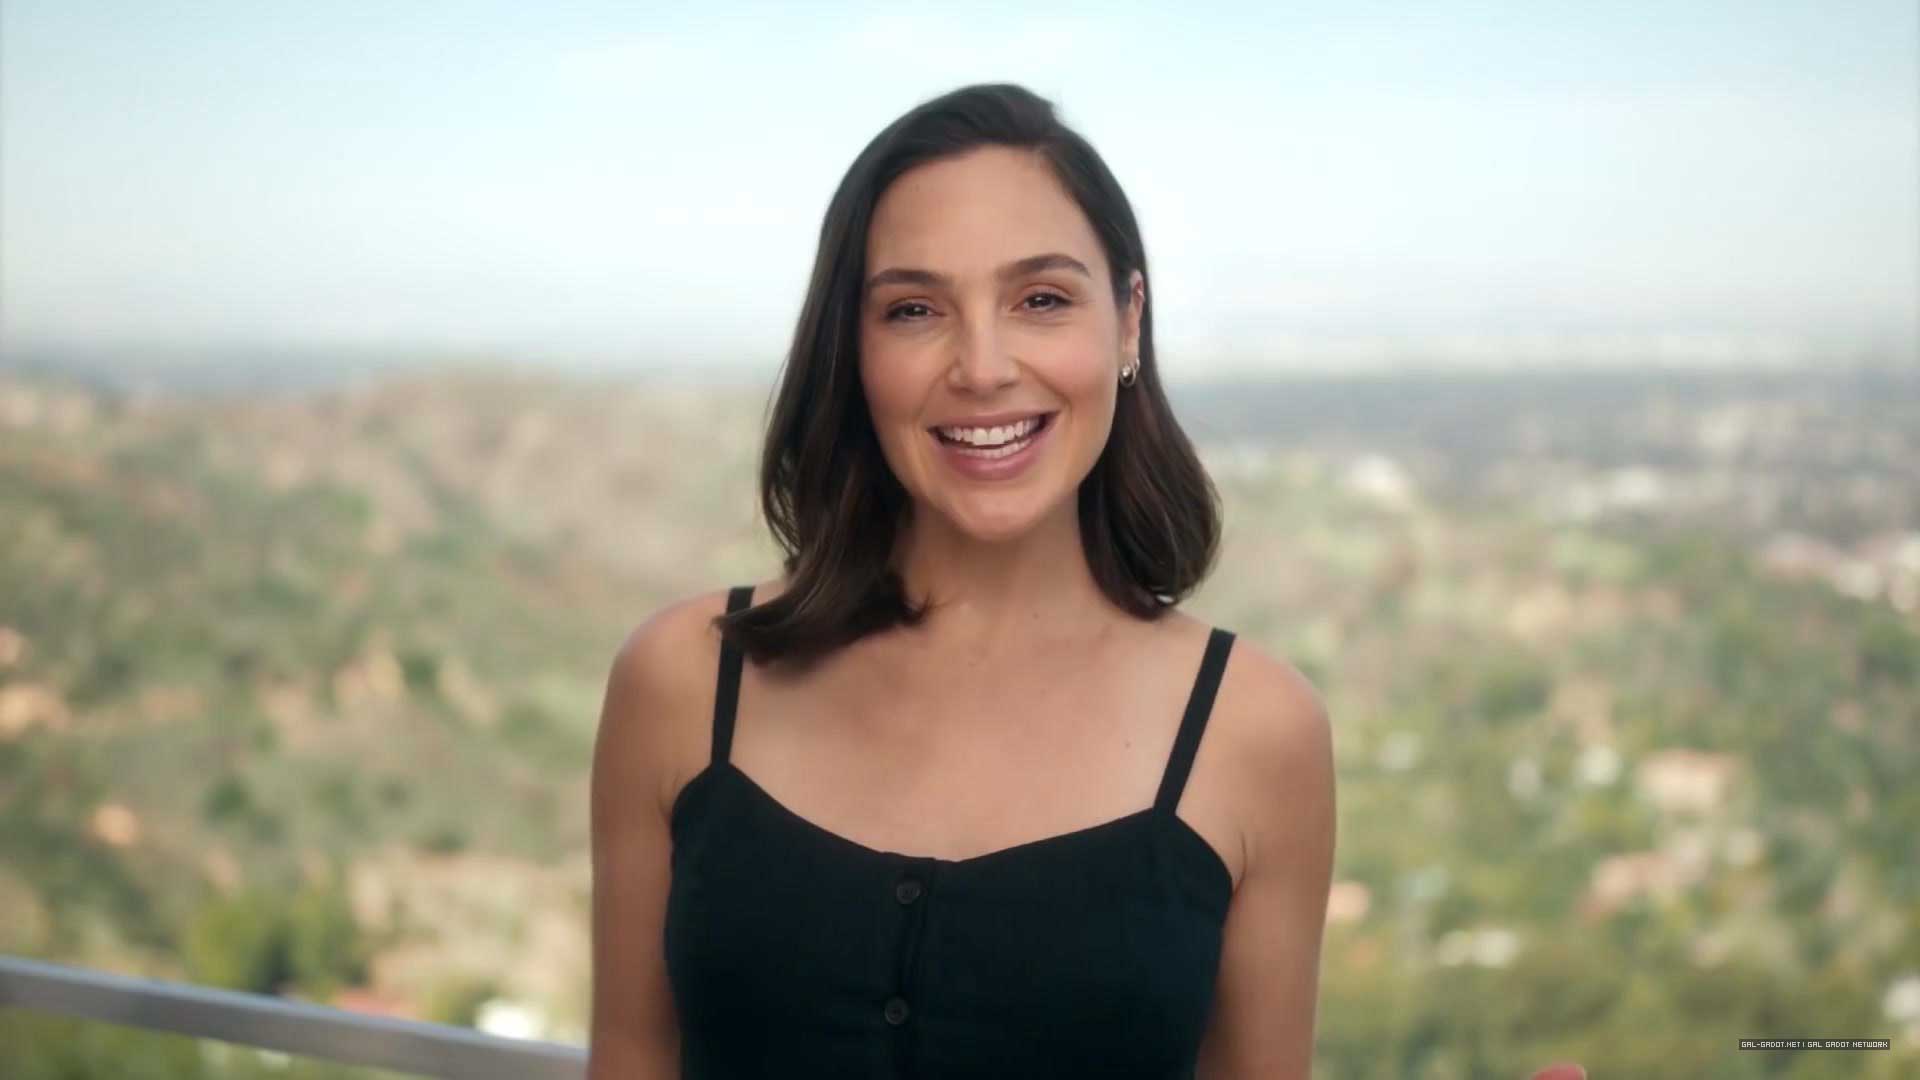 Photos/Video: National Geographic Presents IMPACT With Gal Gadot – Episode 1